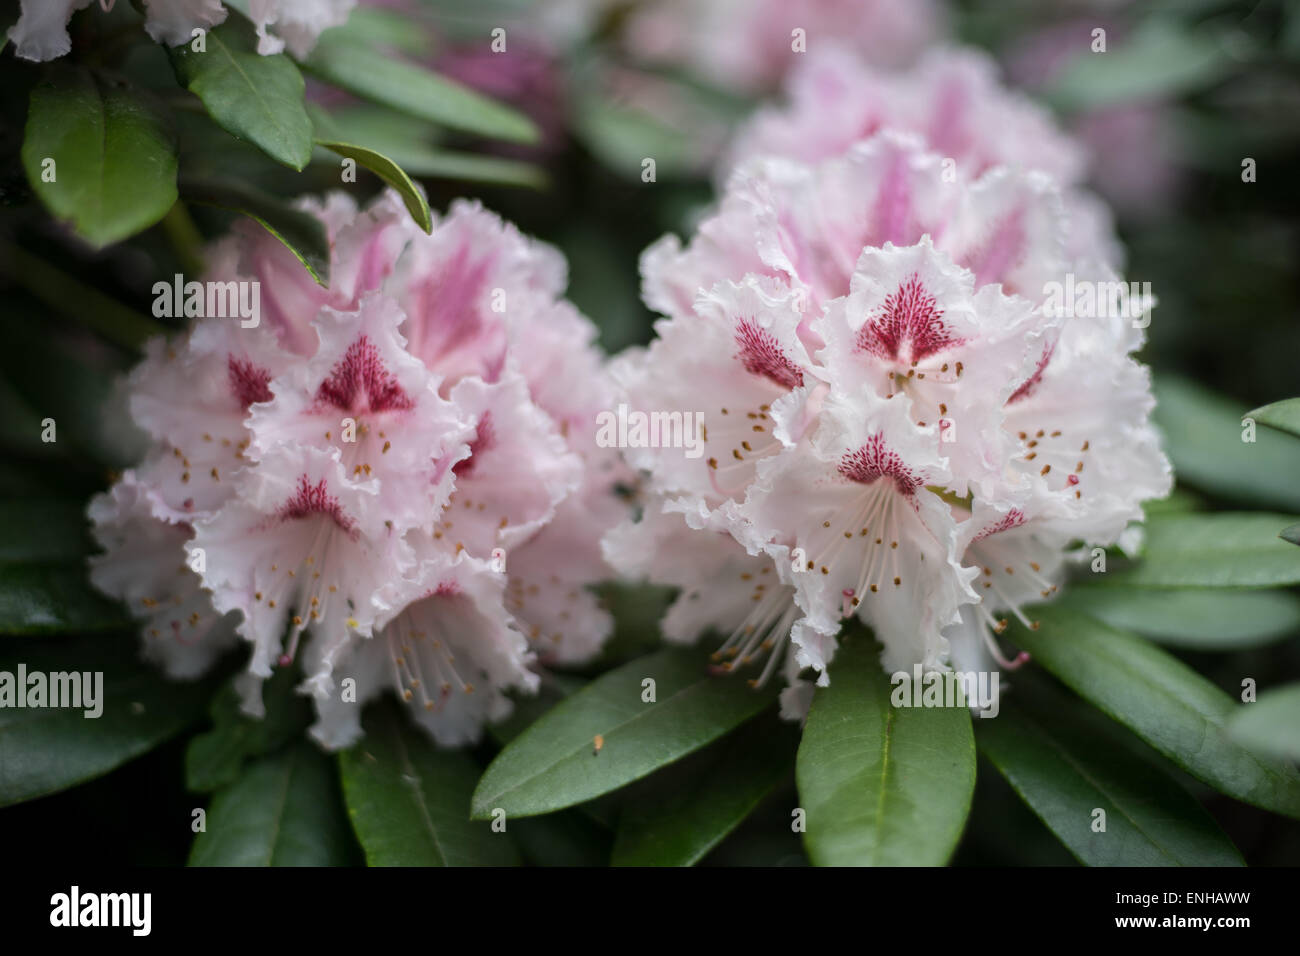 Pink Rhododendron flowers close up Adriaan Koster Stock Photo